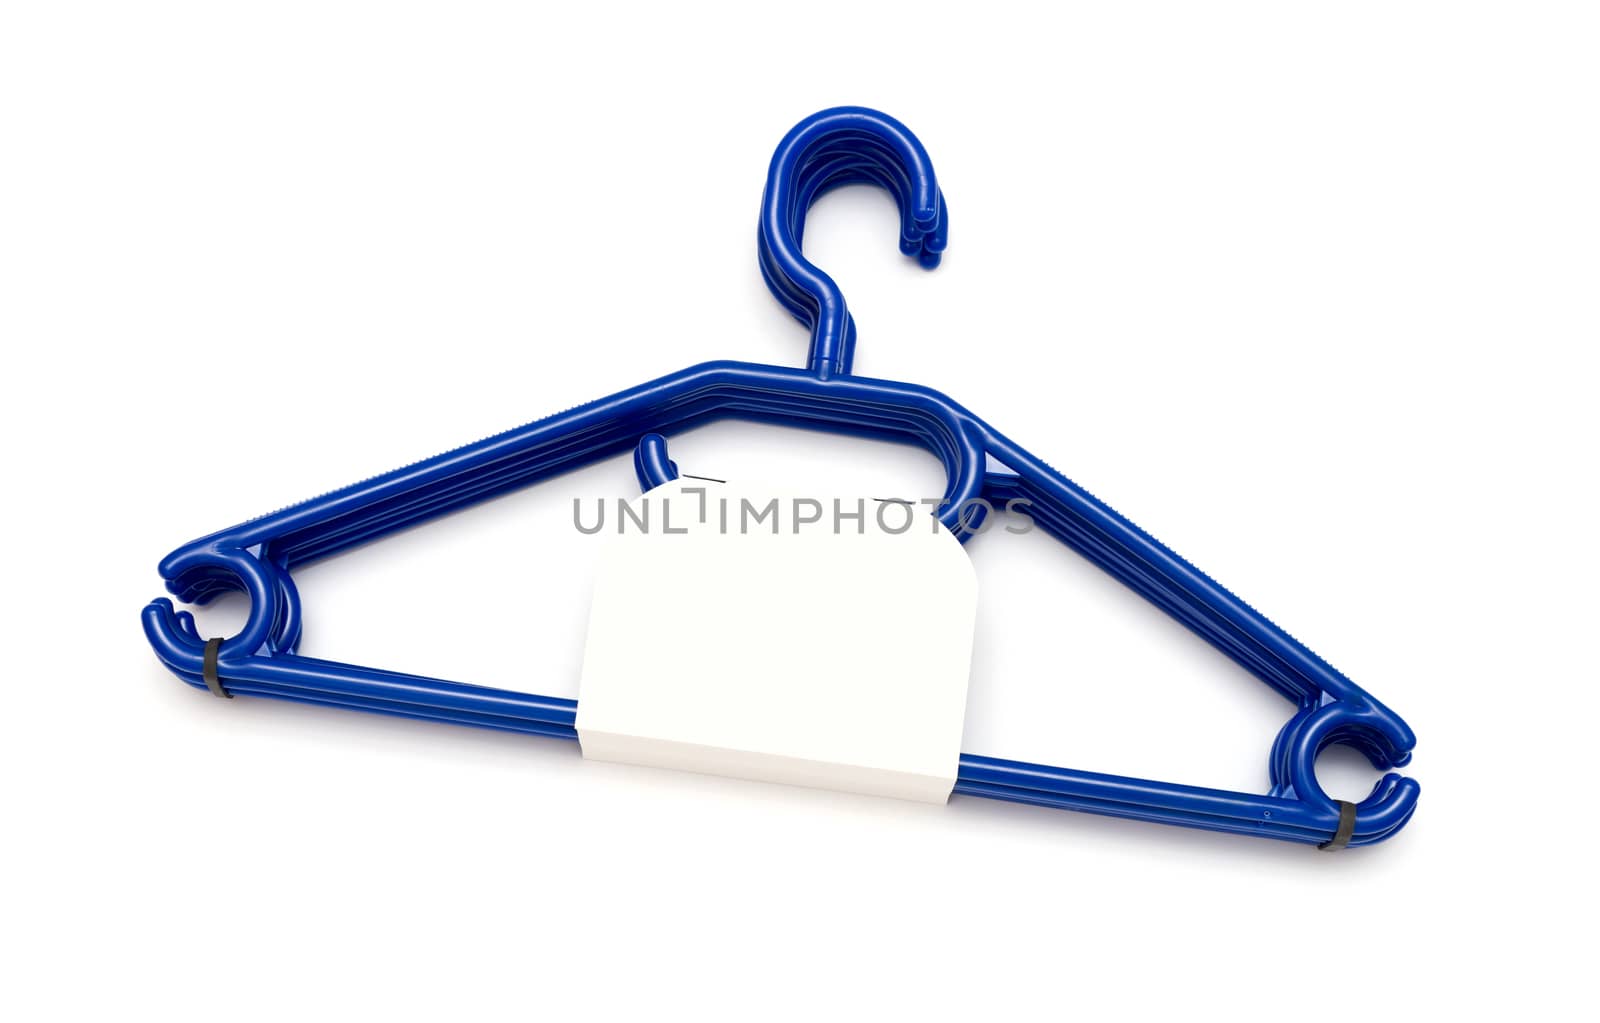 pack of new clothes hanger isolated on white background